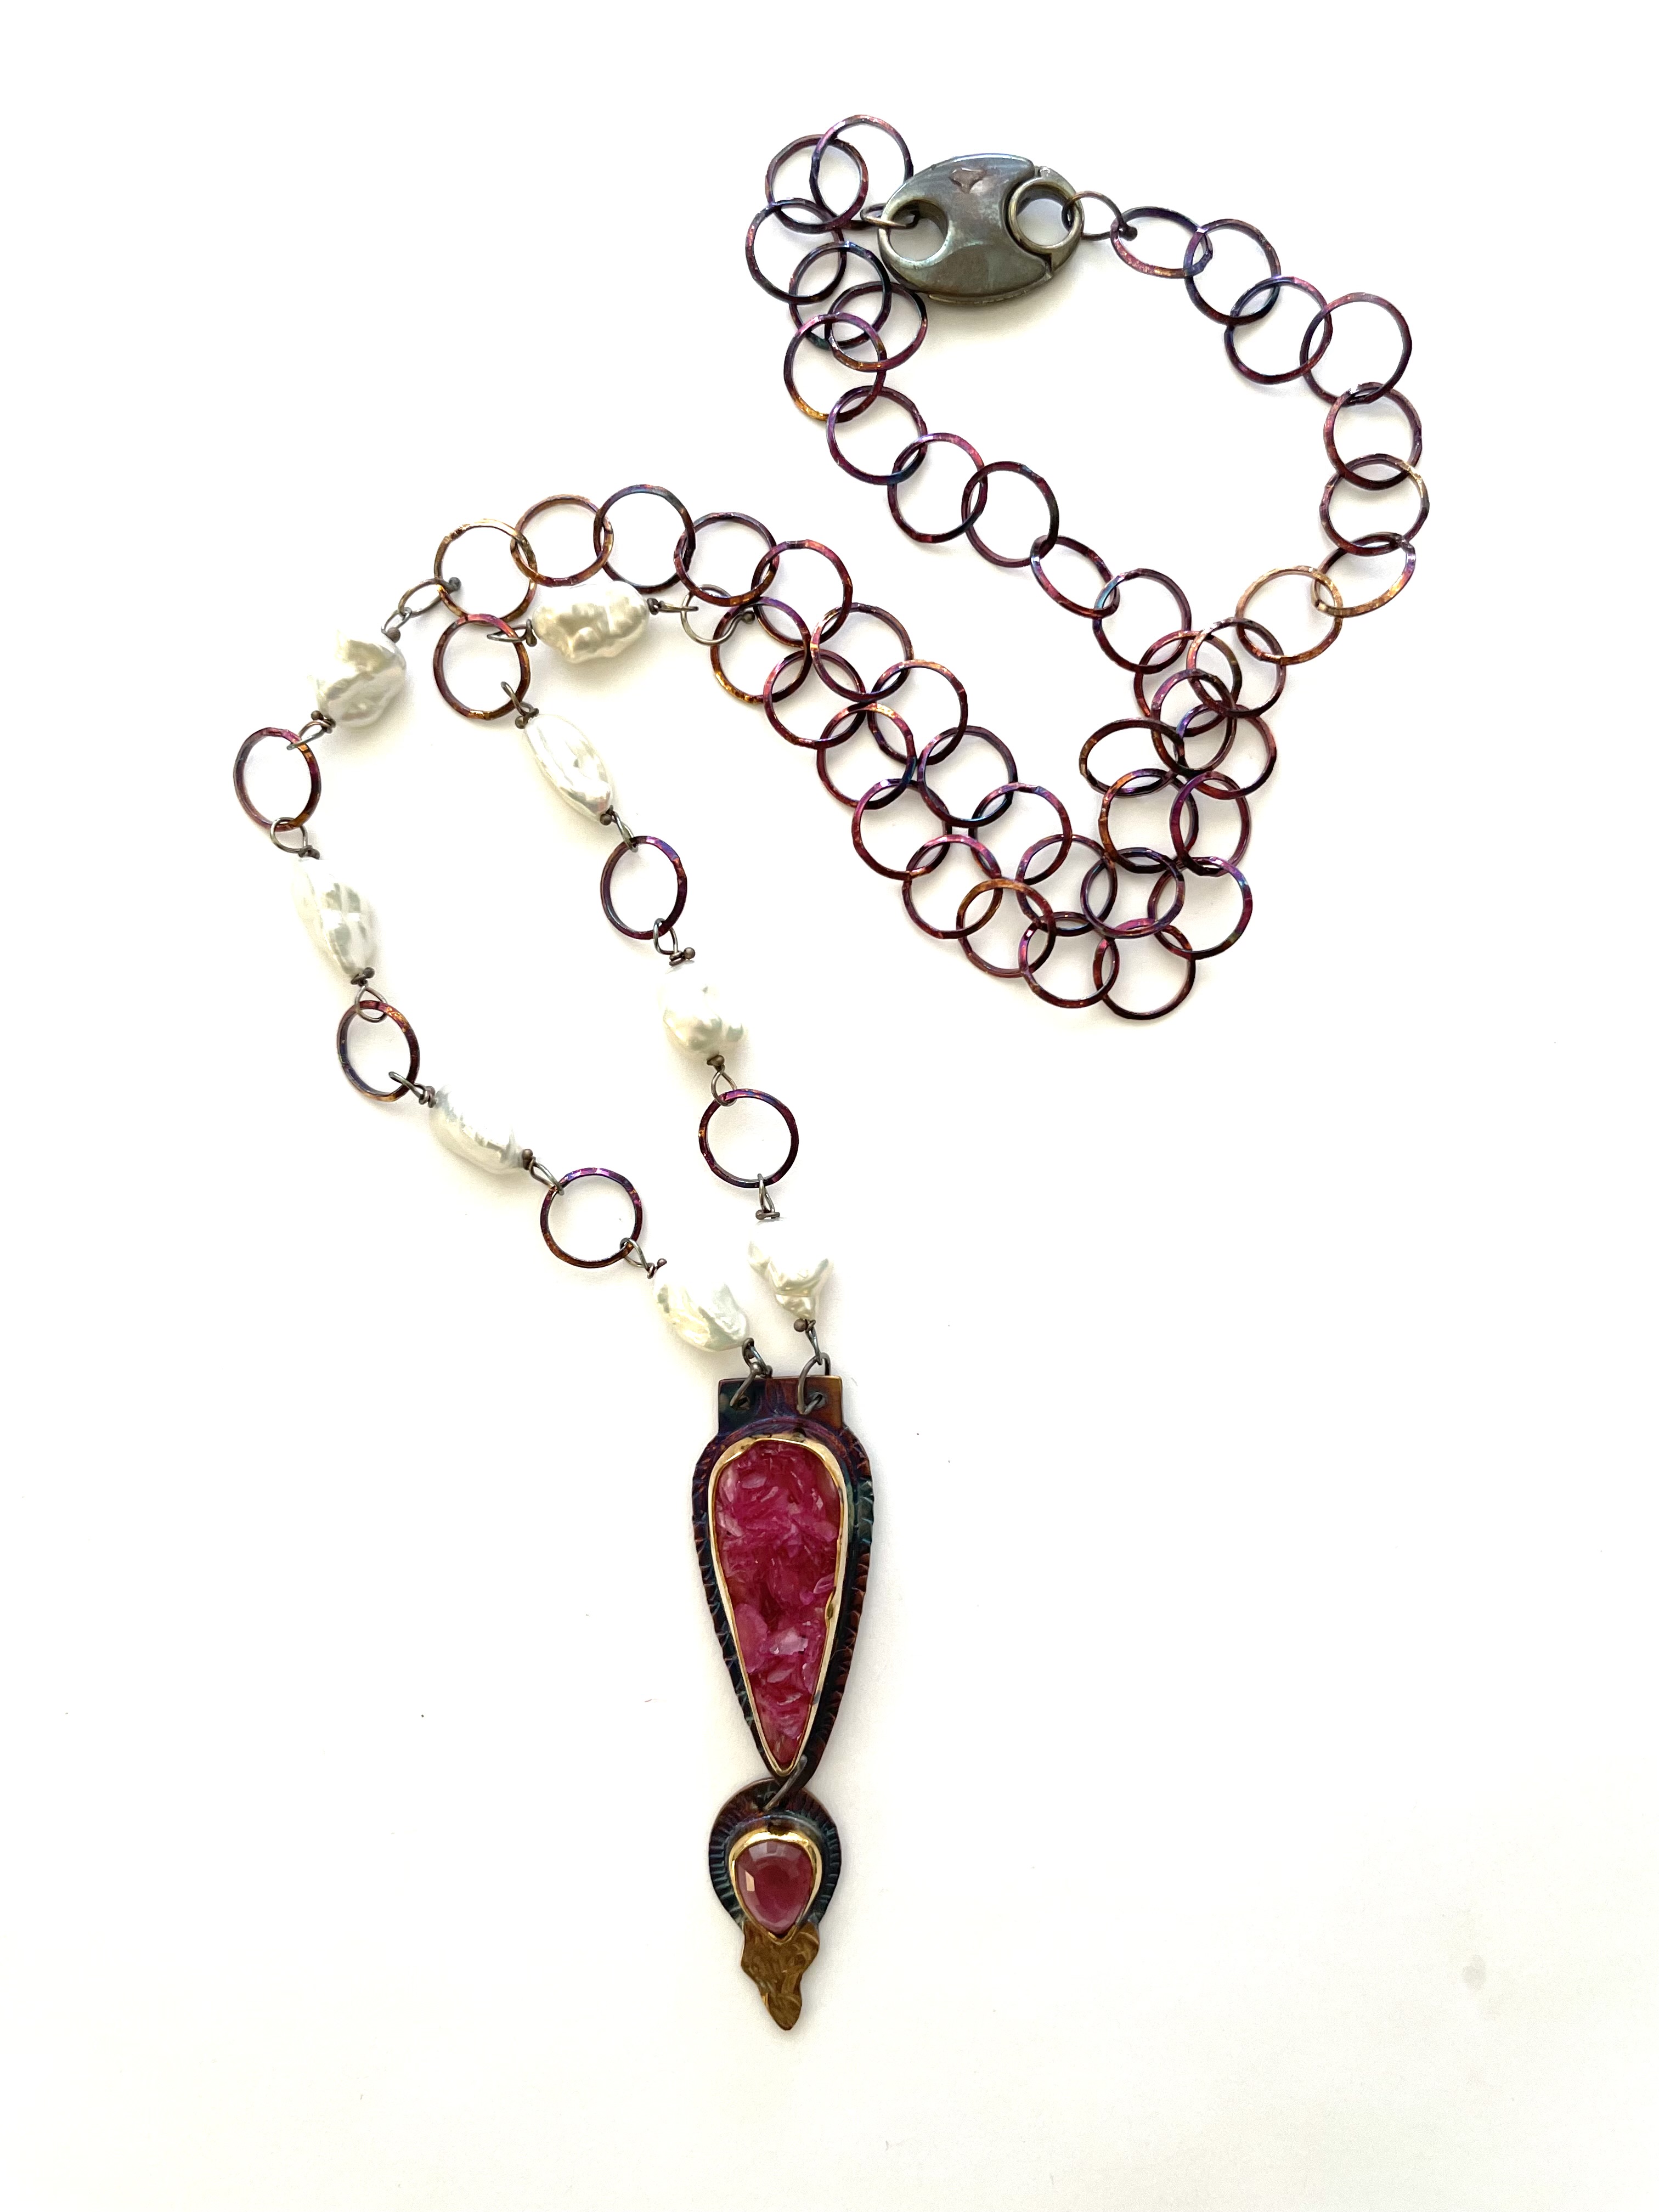 Sterling Silver, 22k Gold, Cobalto Calcite Druzy, and Pink Tourmaline Necklace